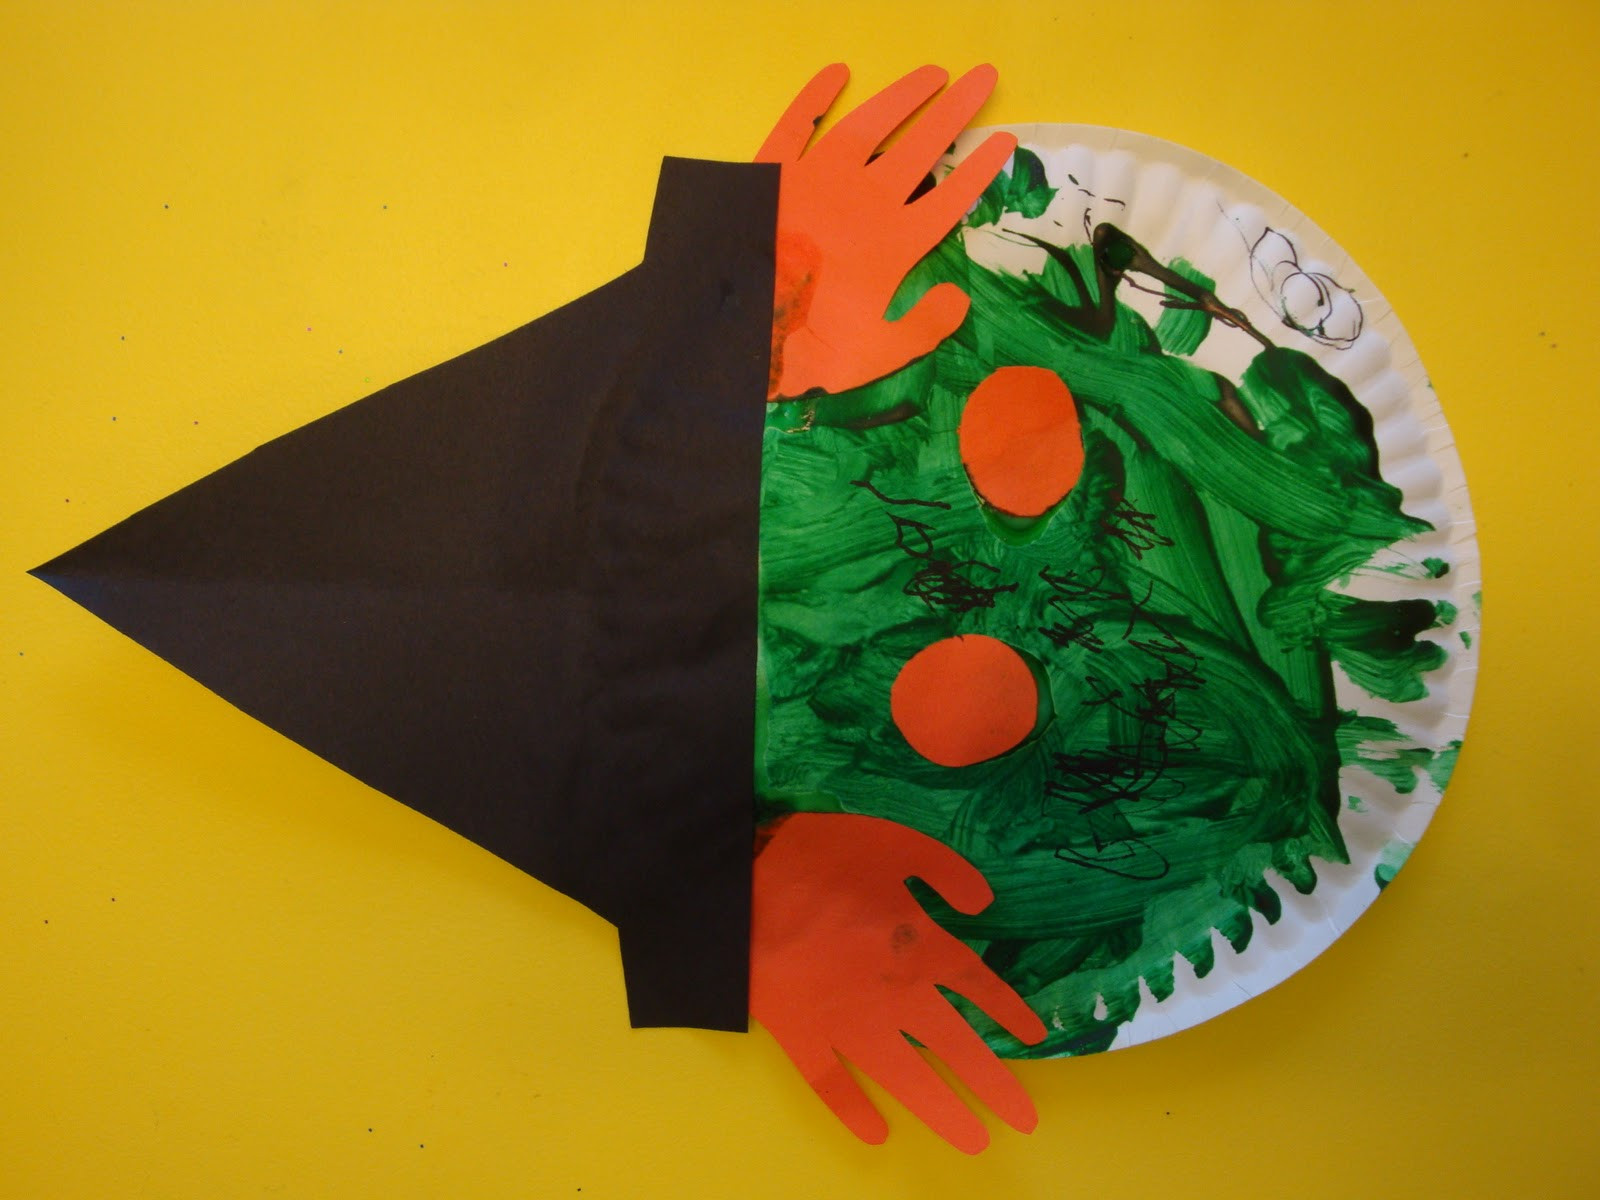 Halloween Art And Crafts For Preschoolers
 Nicci s Little Angels Arts & Craft Projects Halloween Ideas